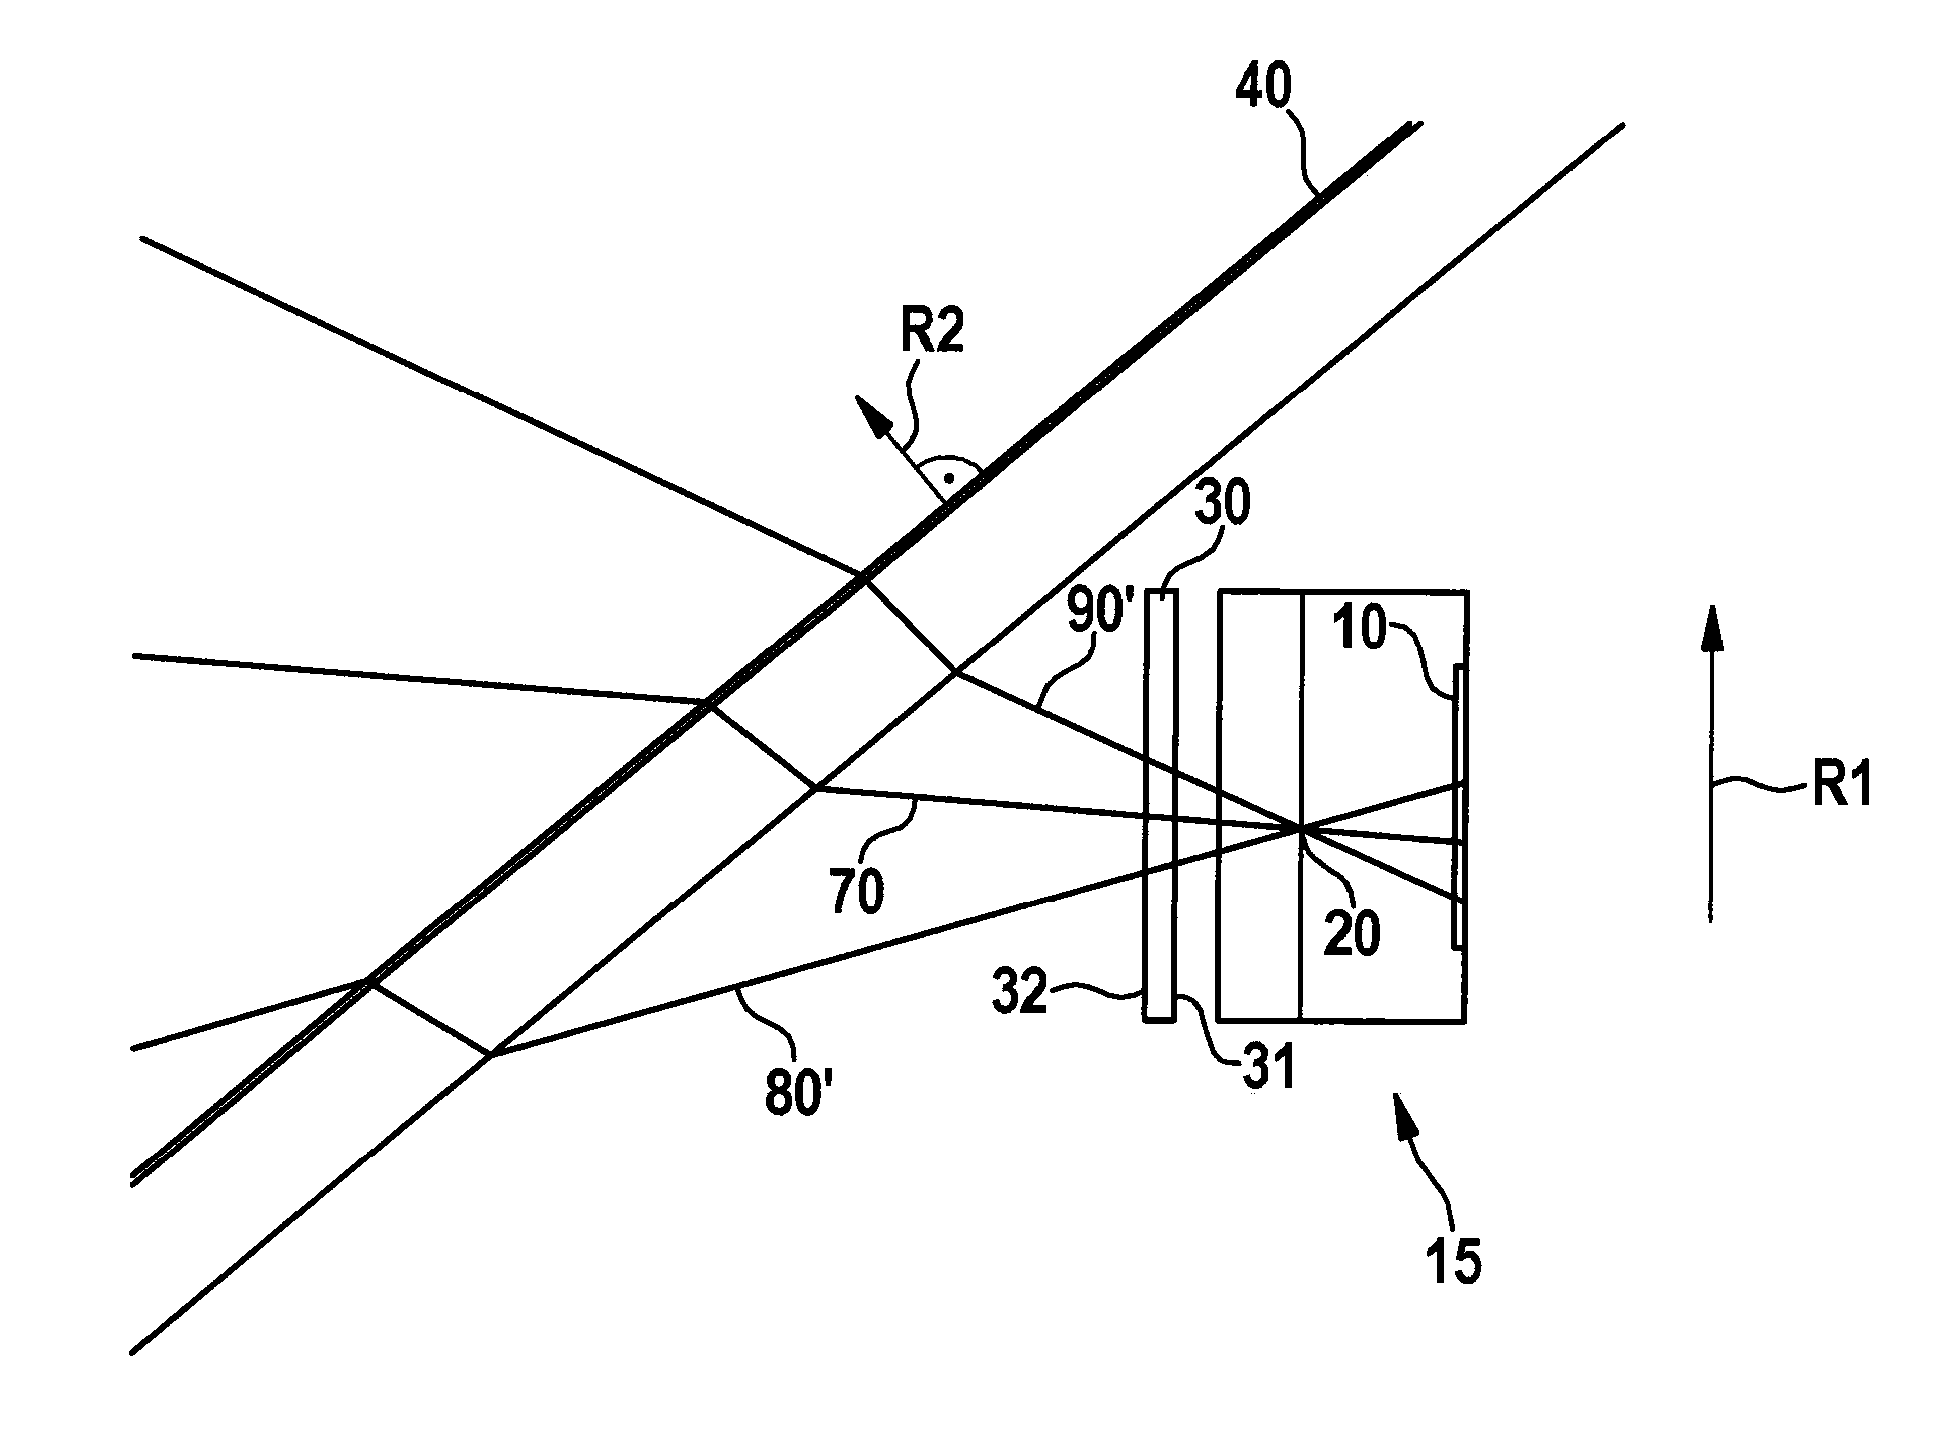 Device for a motor vehicle including an optical area sensor having an optical semiaxis and an optical system having an aperture angle and use of the device in a vehicle